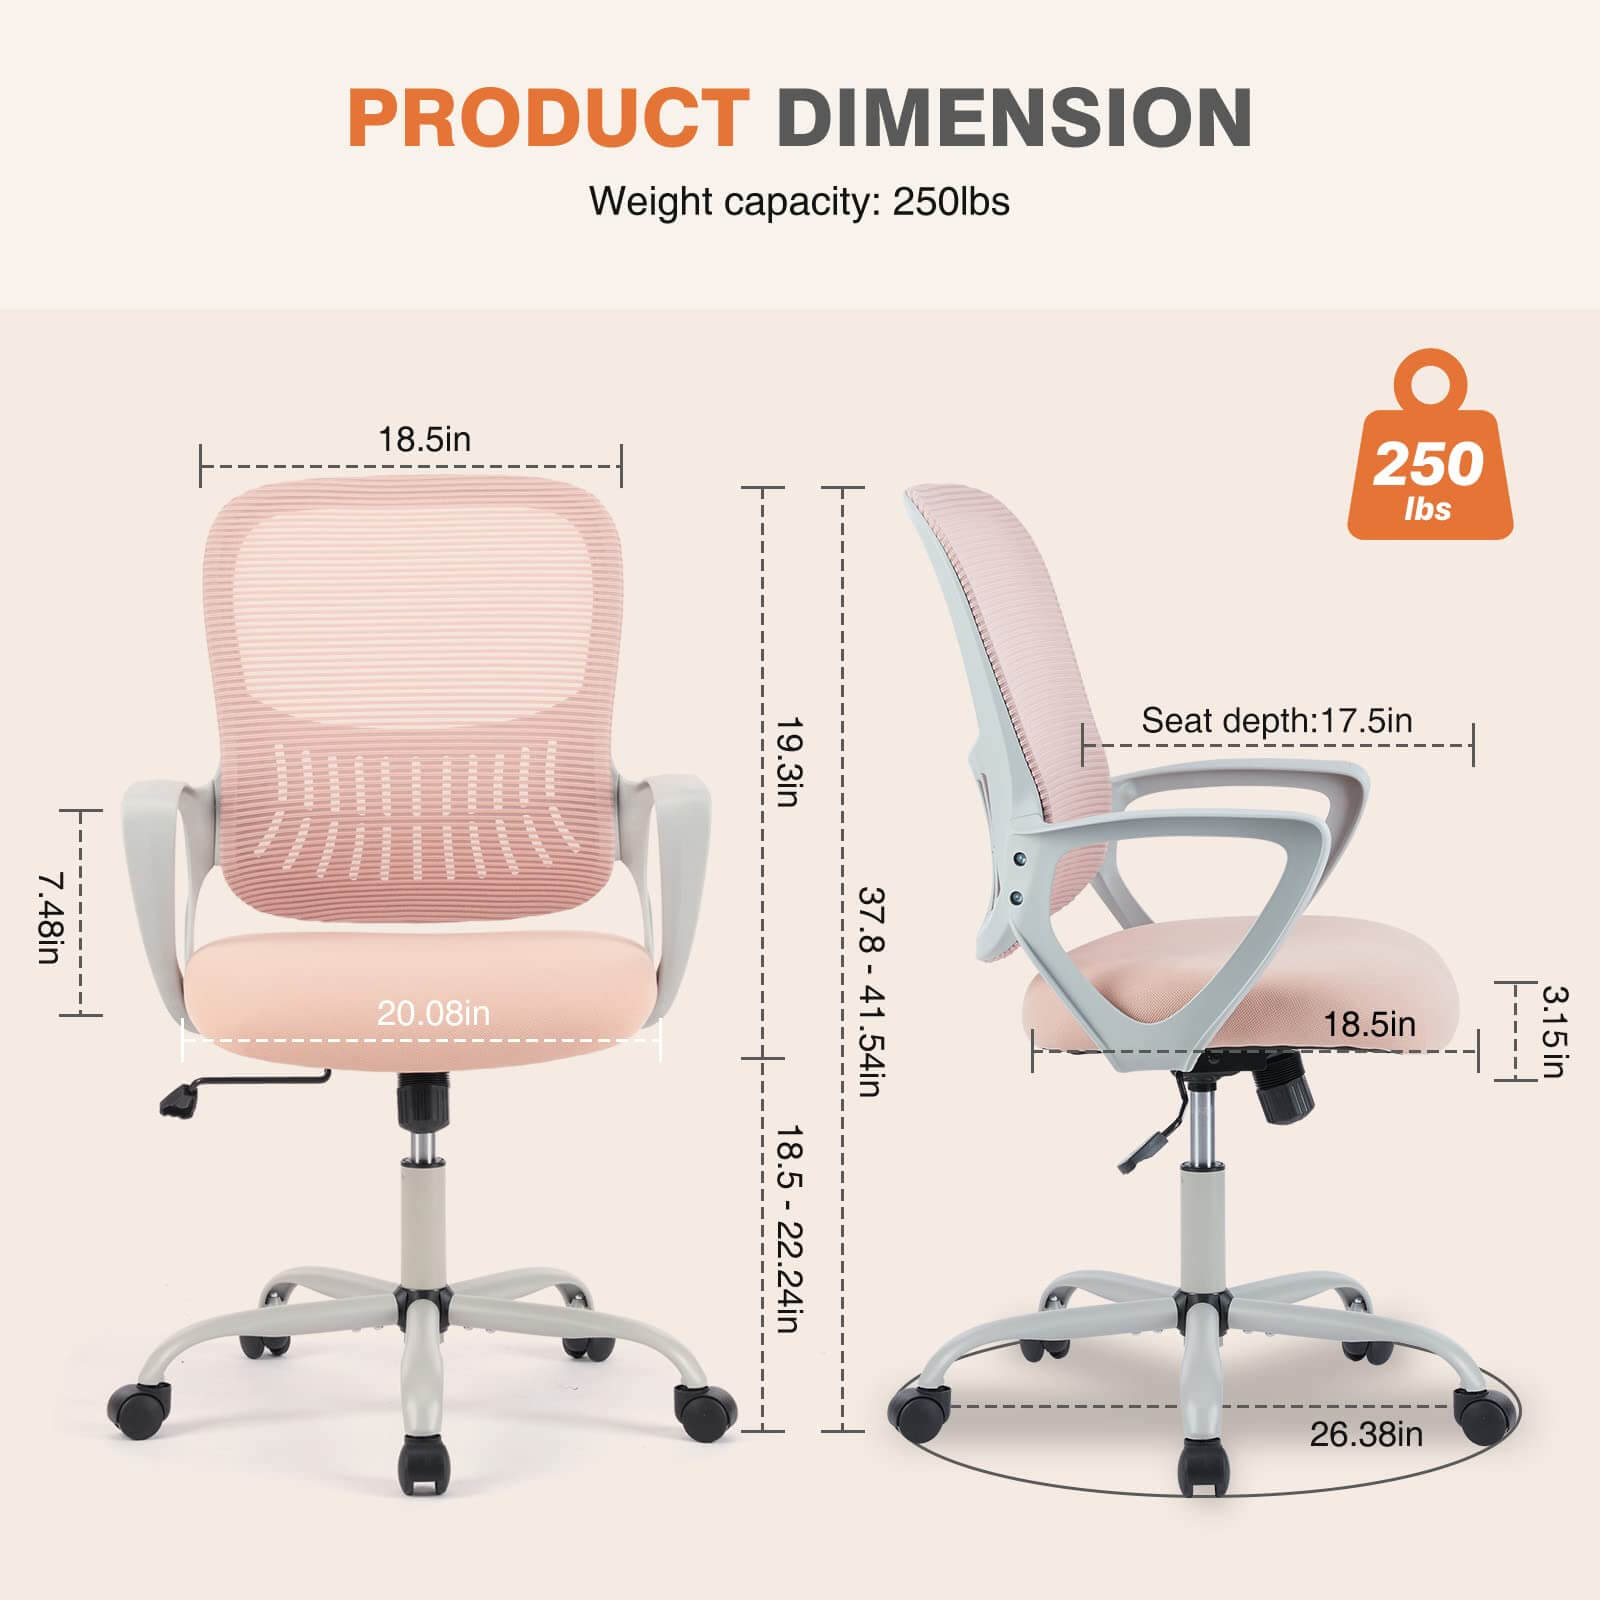 office-chair-ergonomic#Quantity_2 Chair#Color_Pink